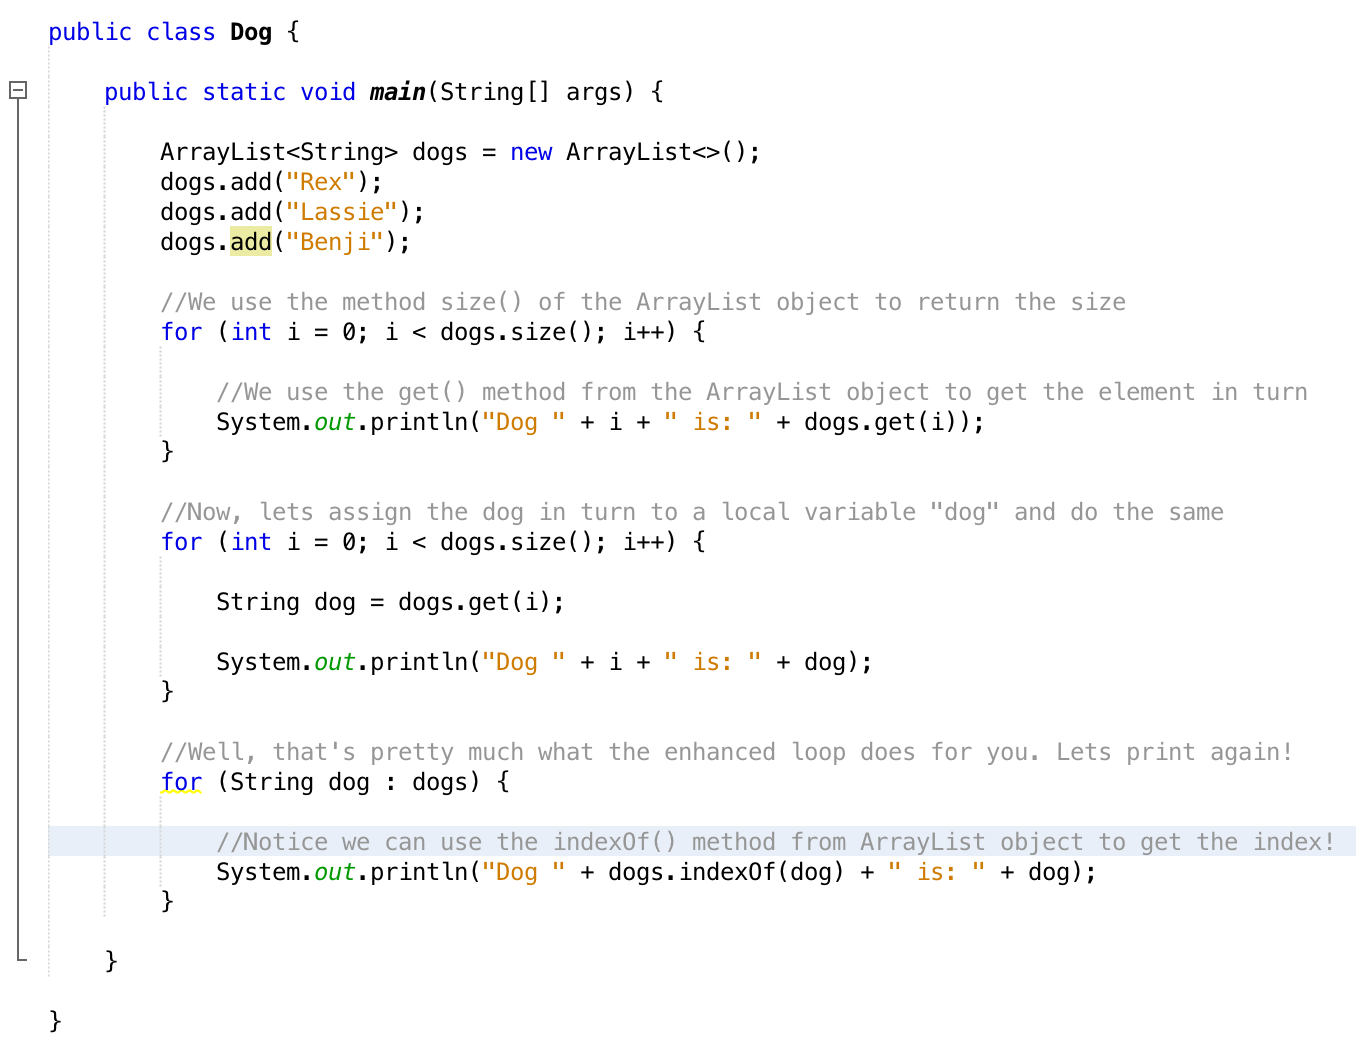 java for loop syntax colon